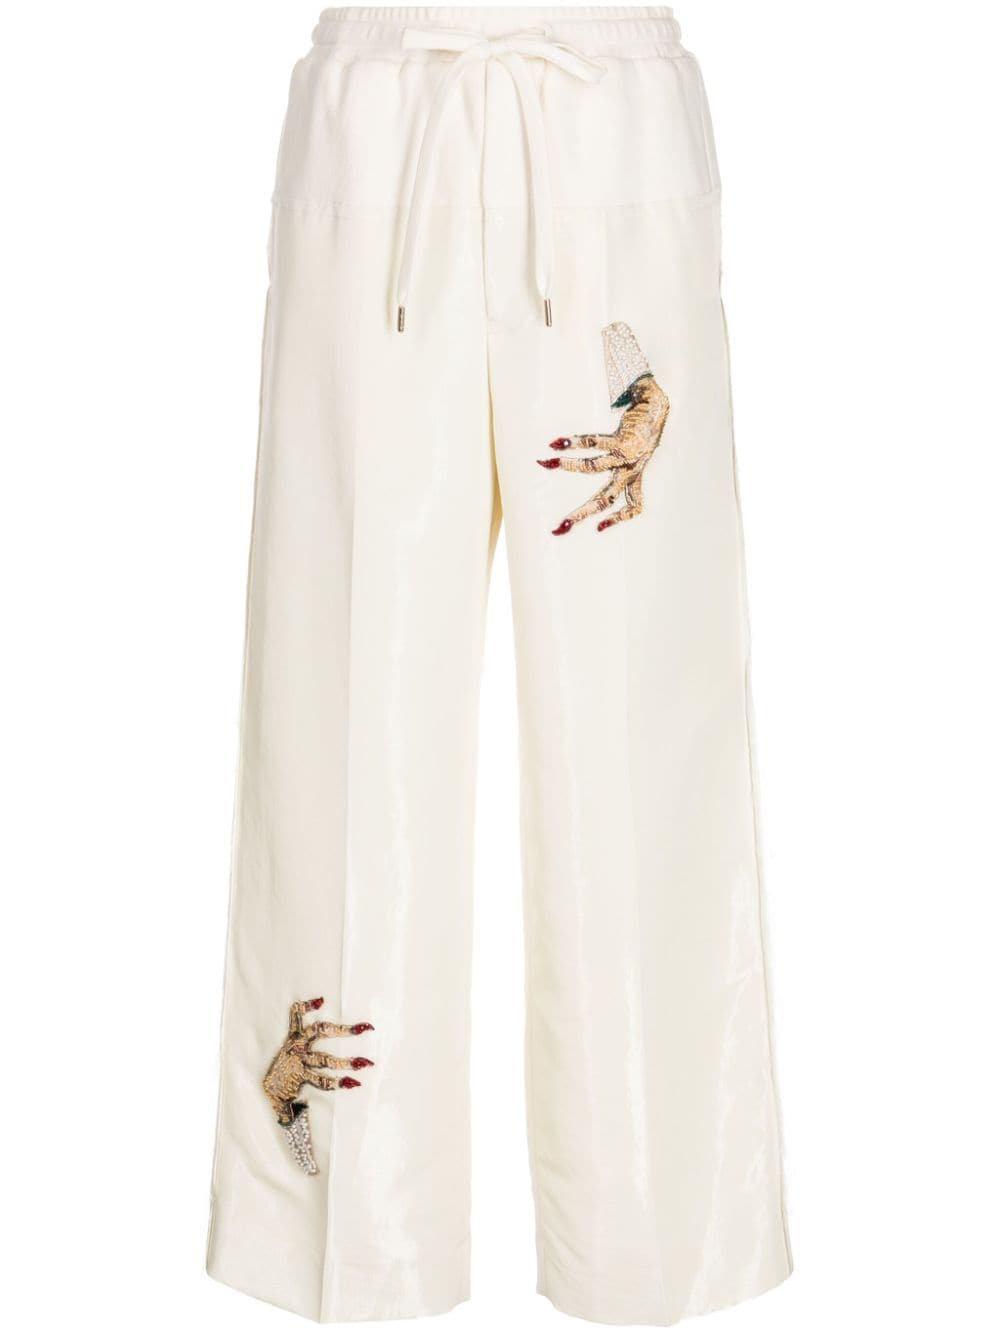 Undercover bead-embellished palazzo trousers - White von Undercover